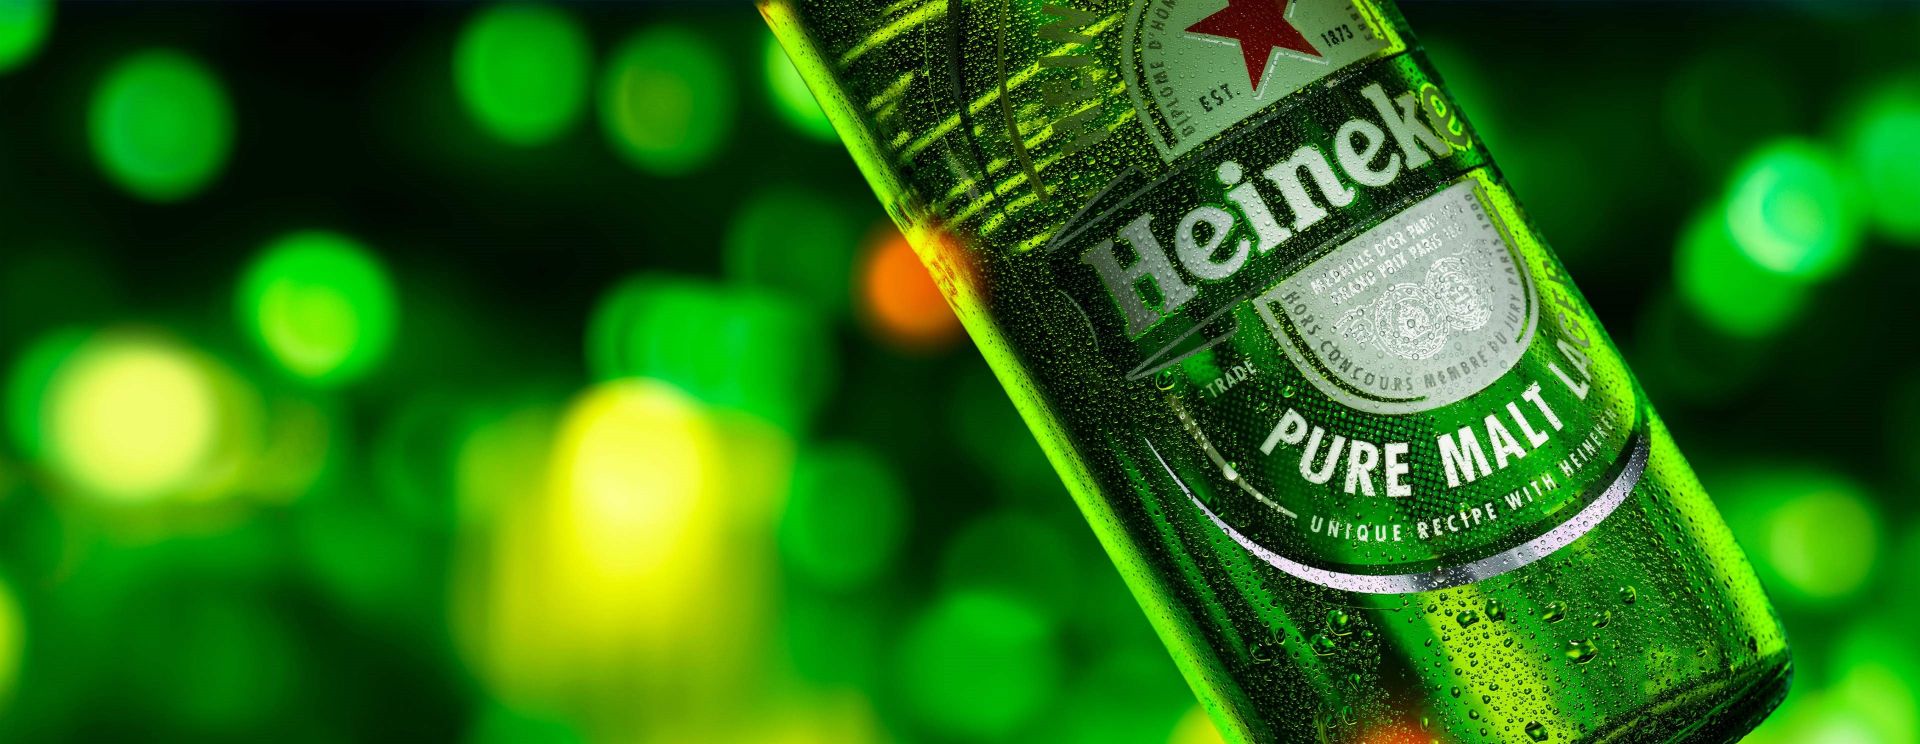 Celebrate 150 years of Good Times with Heineken — One Way or Another!